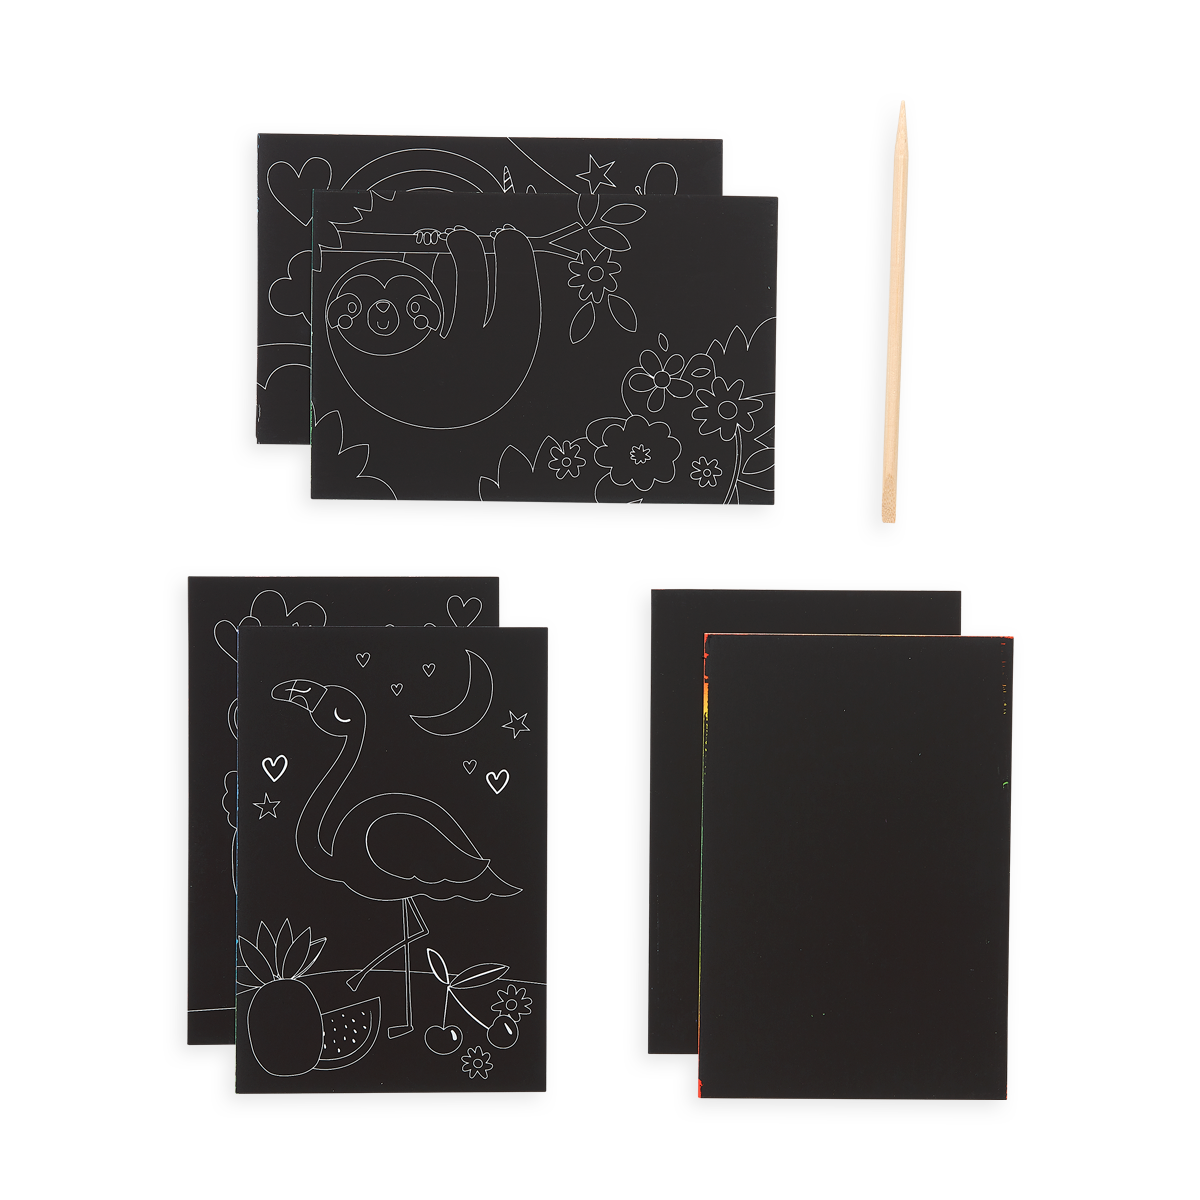 Funtastic Friends Scratch and Scribble Mini Scratch Art Kit package content which includes 6 sheets and a wooden stylus. 